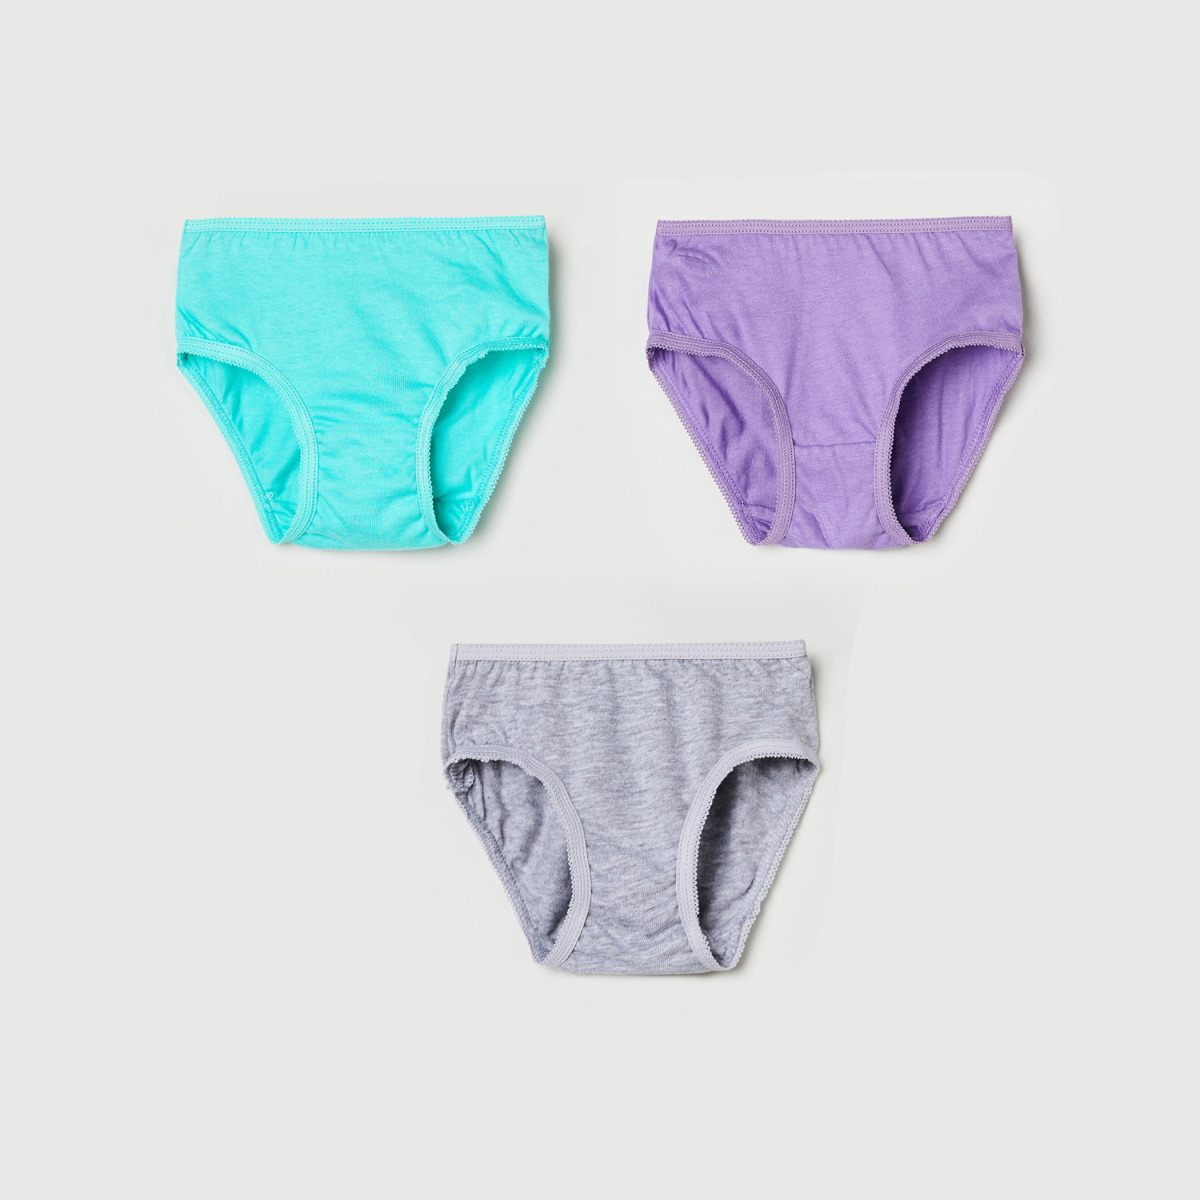 MAX Solid Hipster Panties - Pack of 3 Pcs.